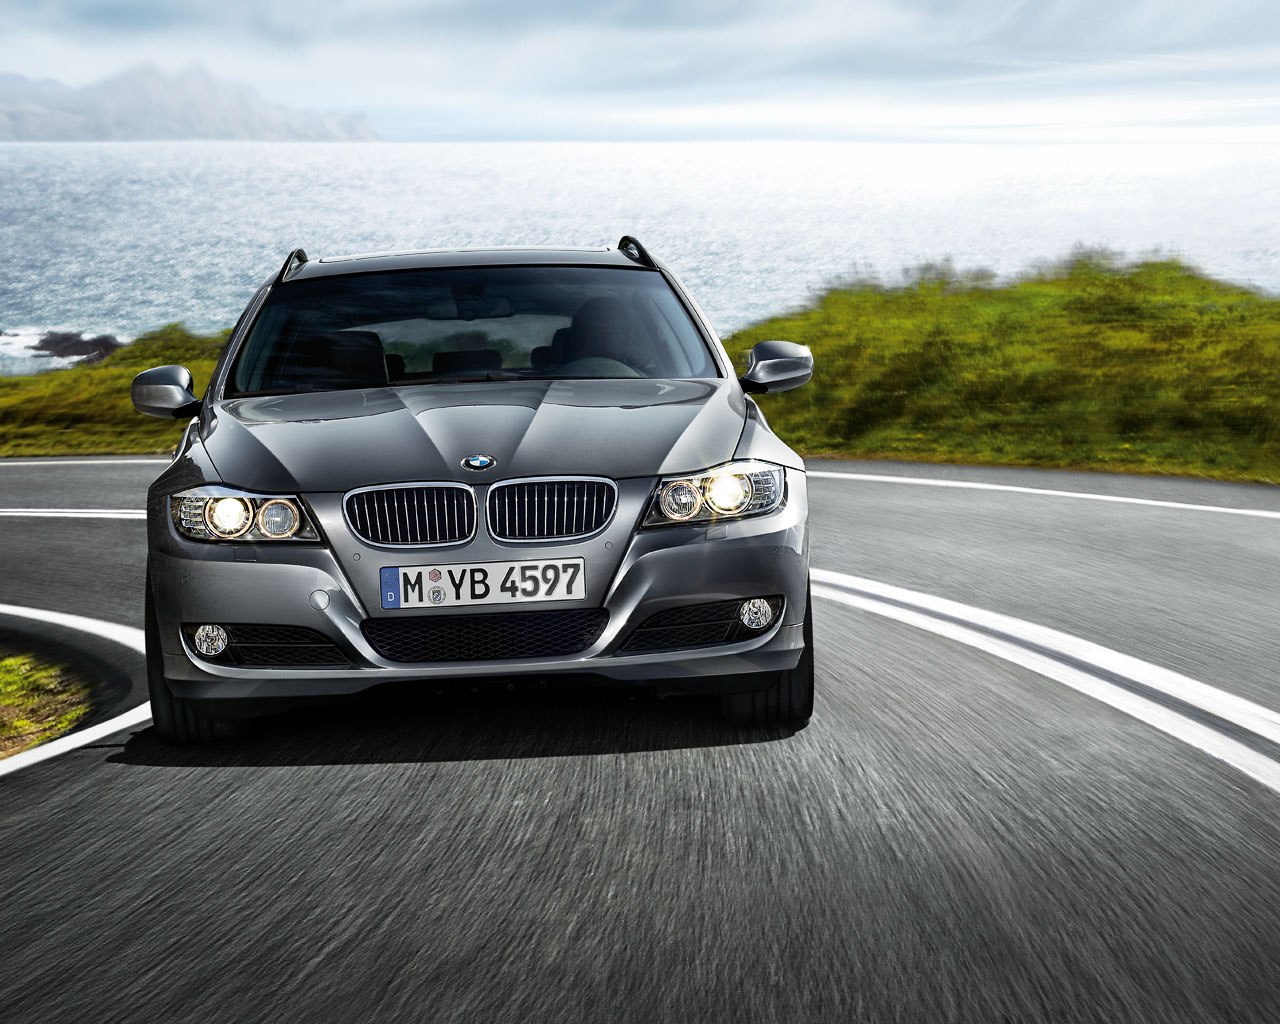 2009 Bmw 3 Series Touring Wallpapers